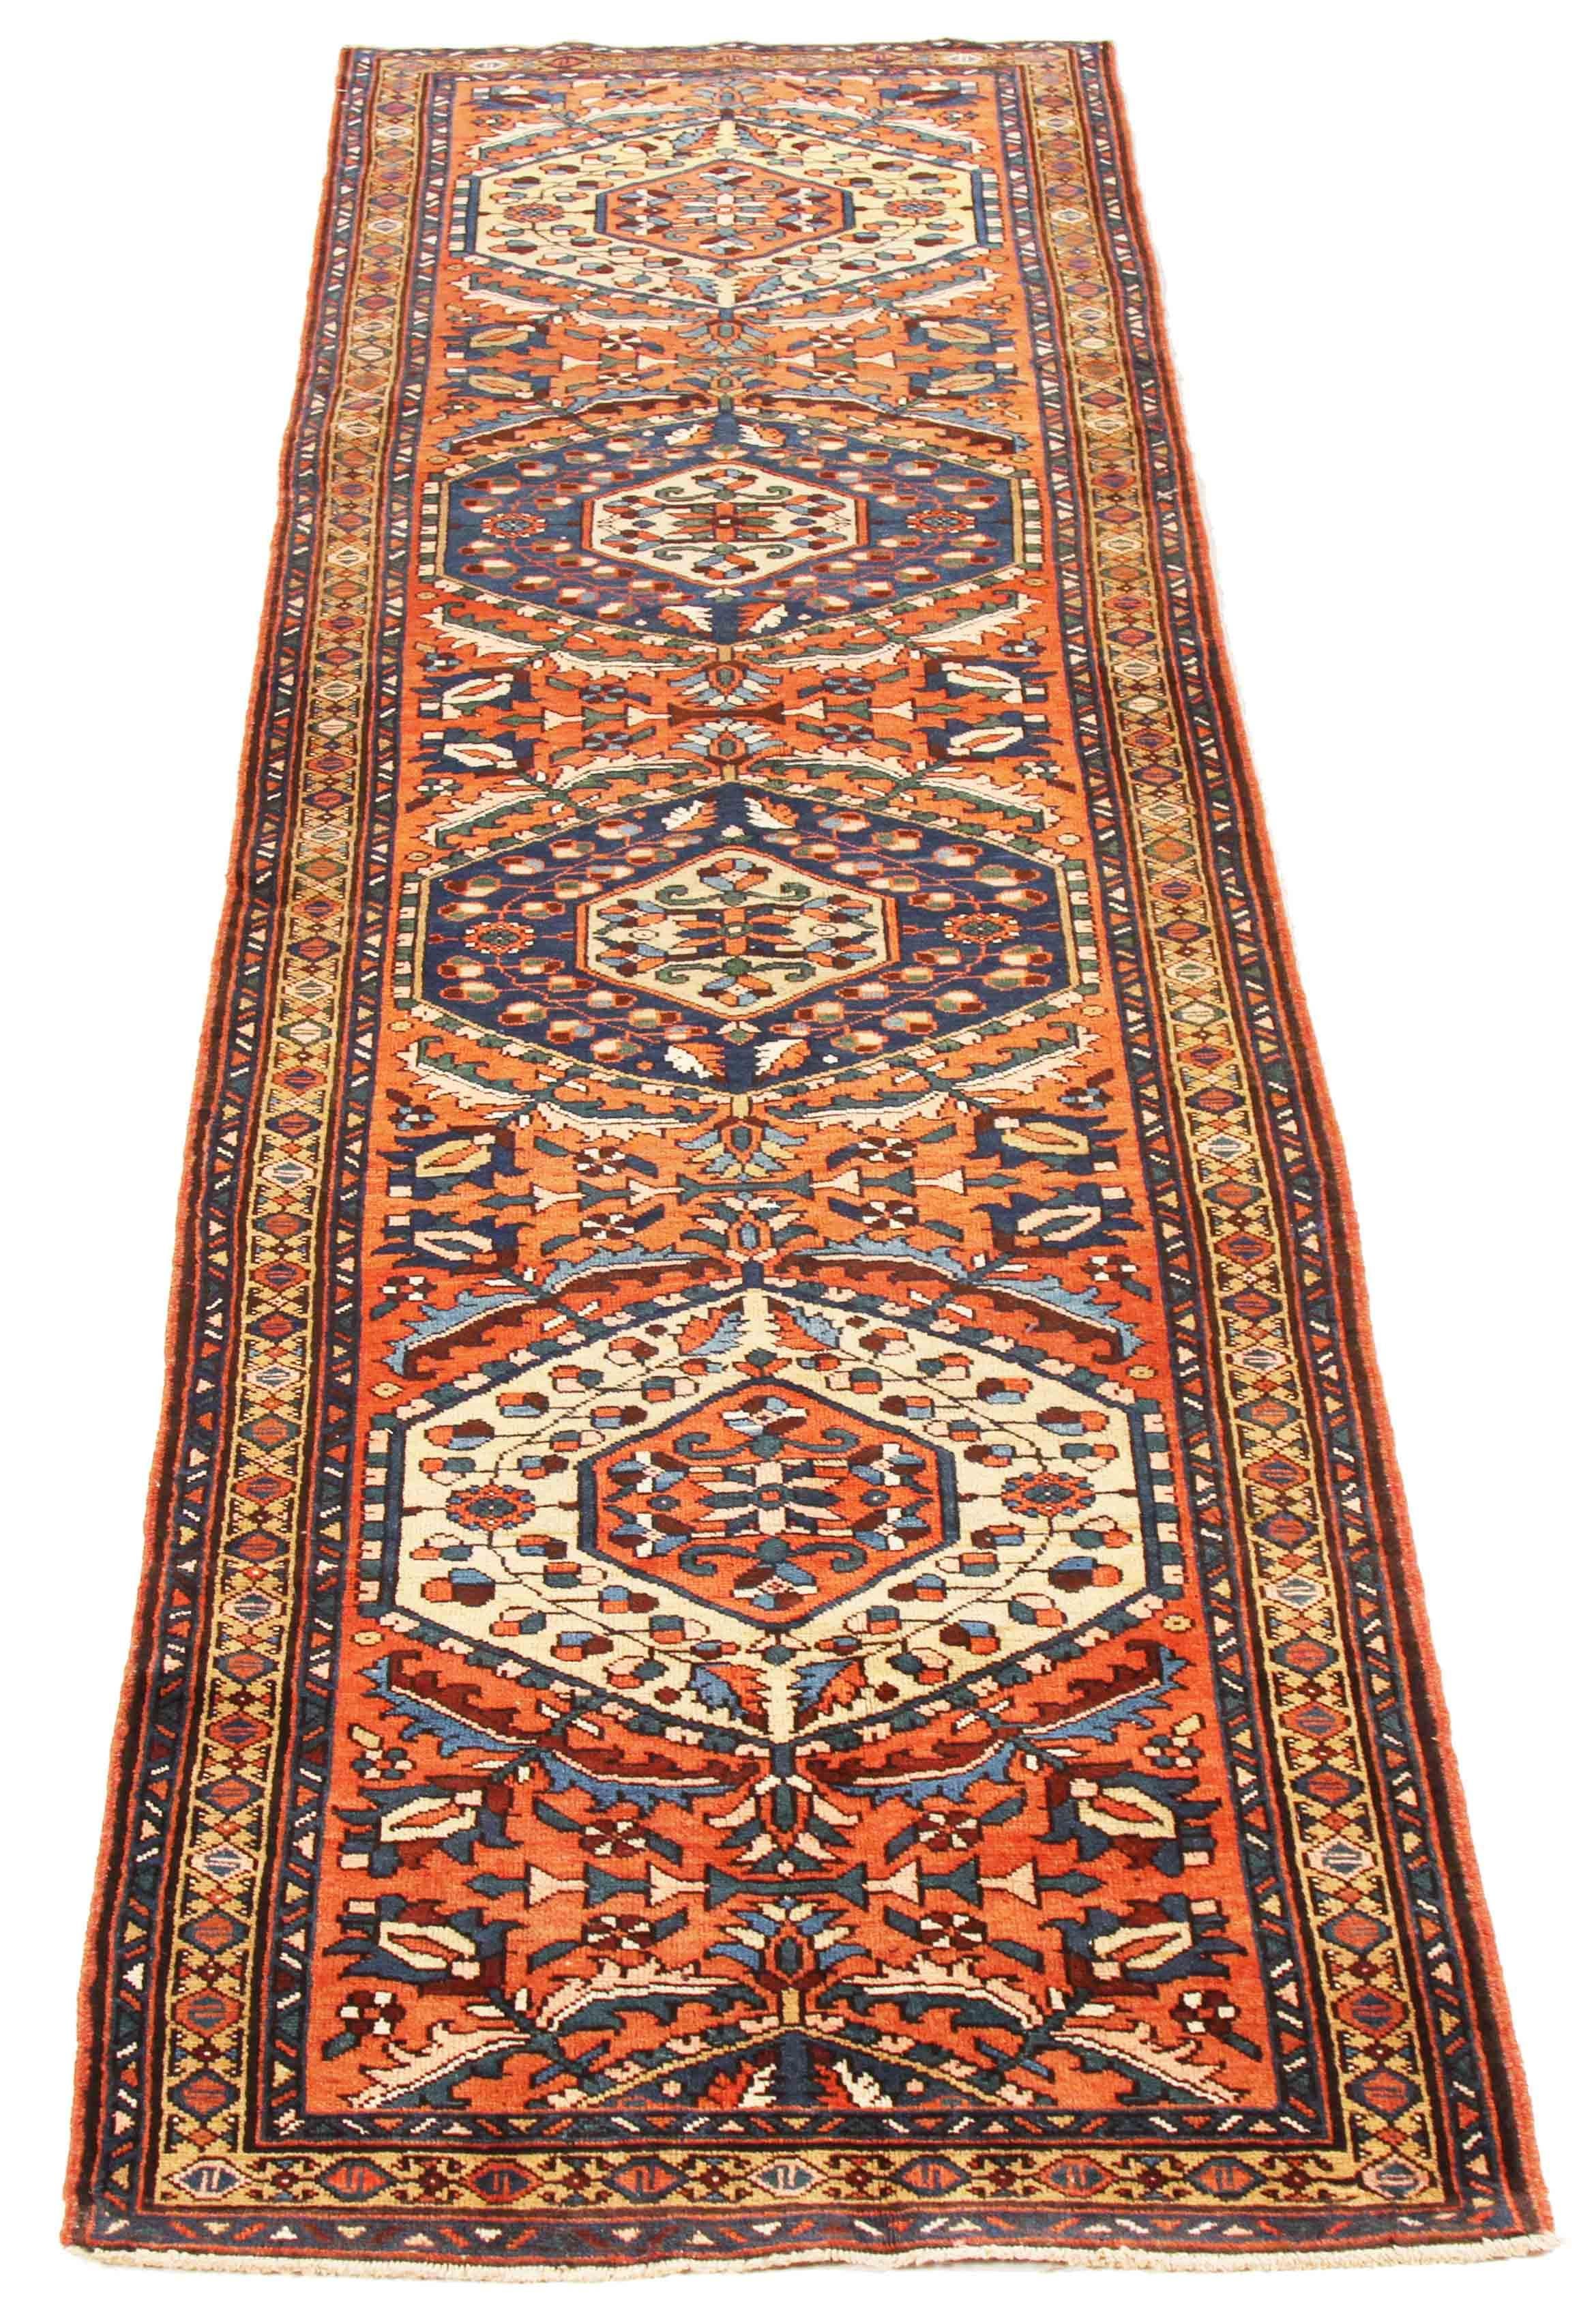 Hand-Knotted Antique Persian Rug Azerbaijan Design with Nature-Inspired Patterns, circa 1960s For Sale